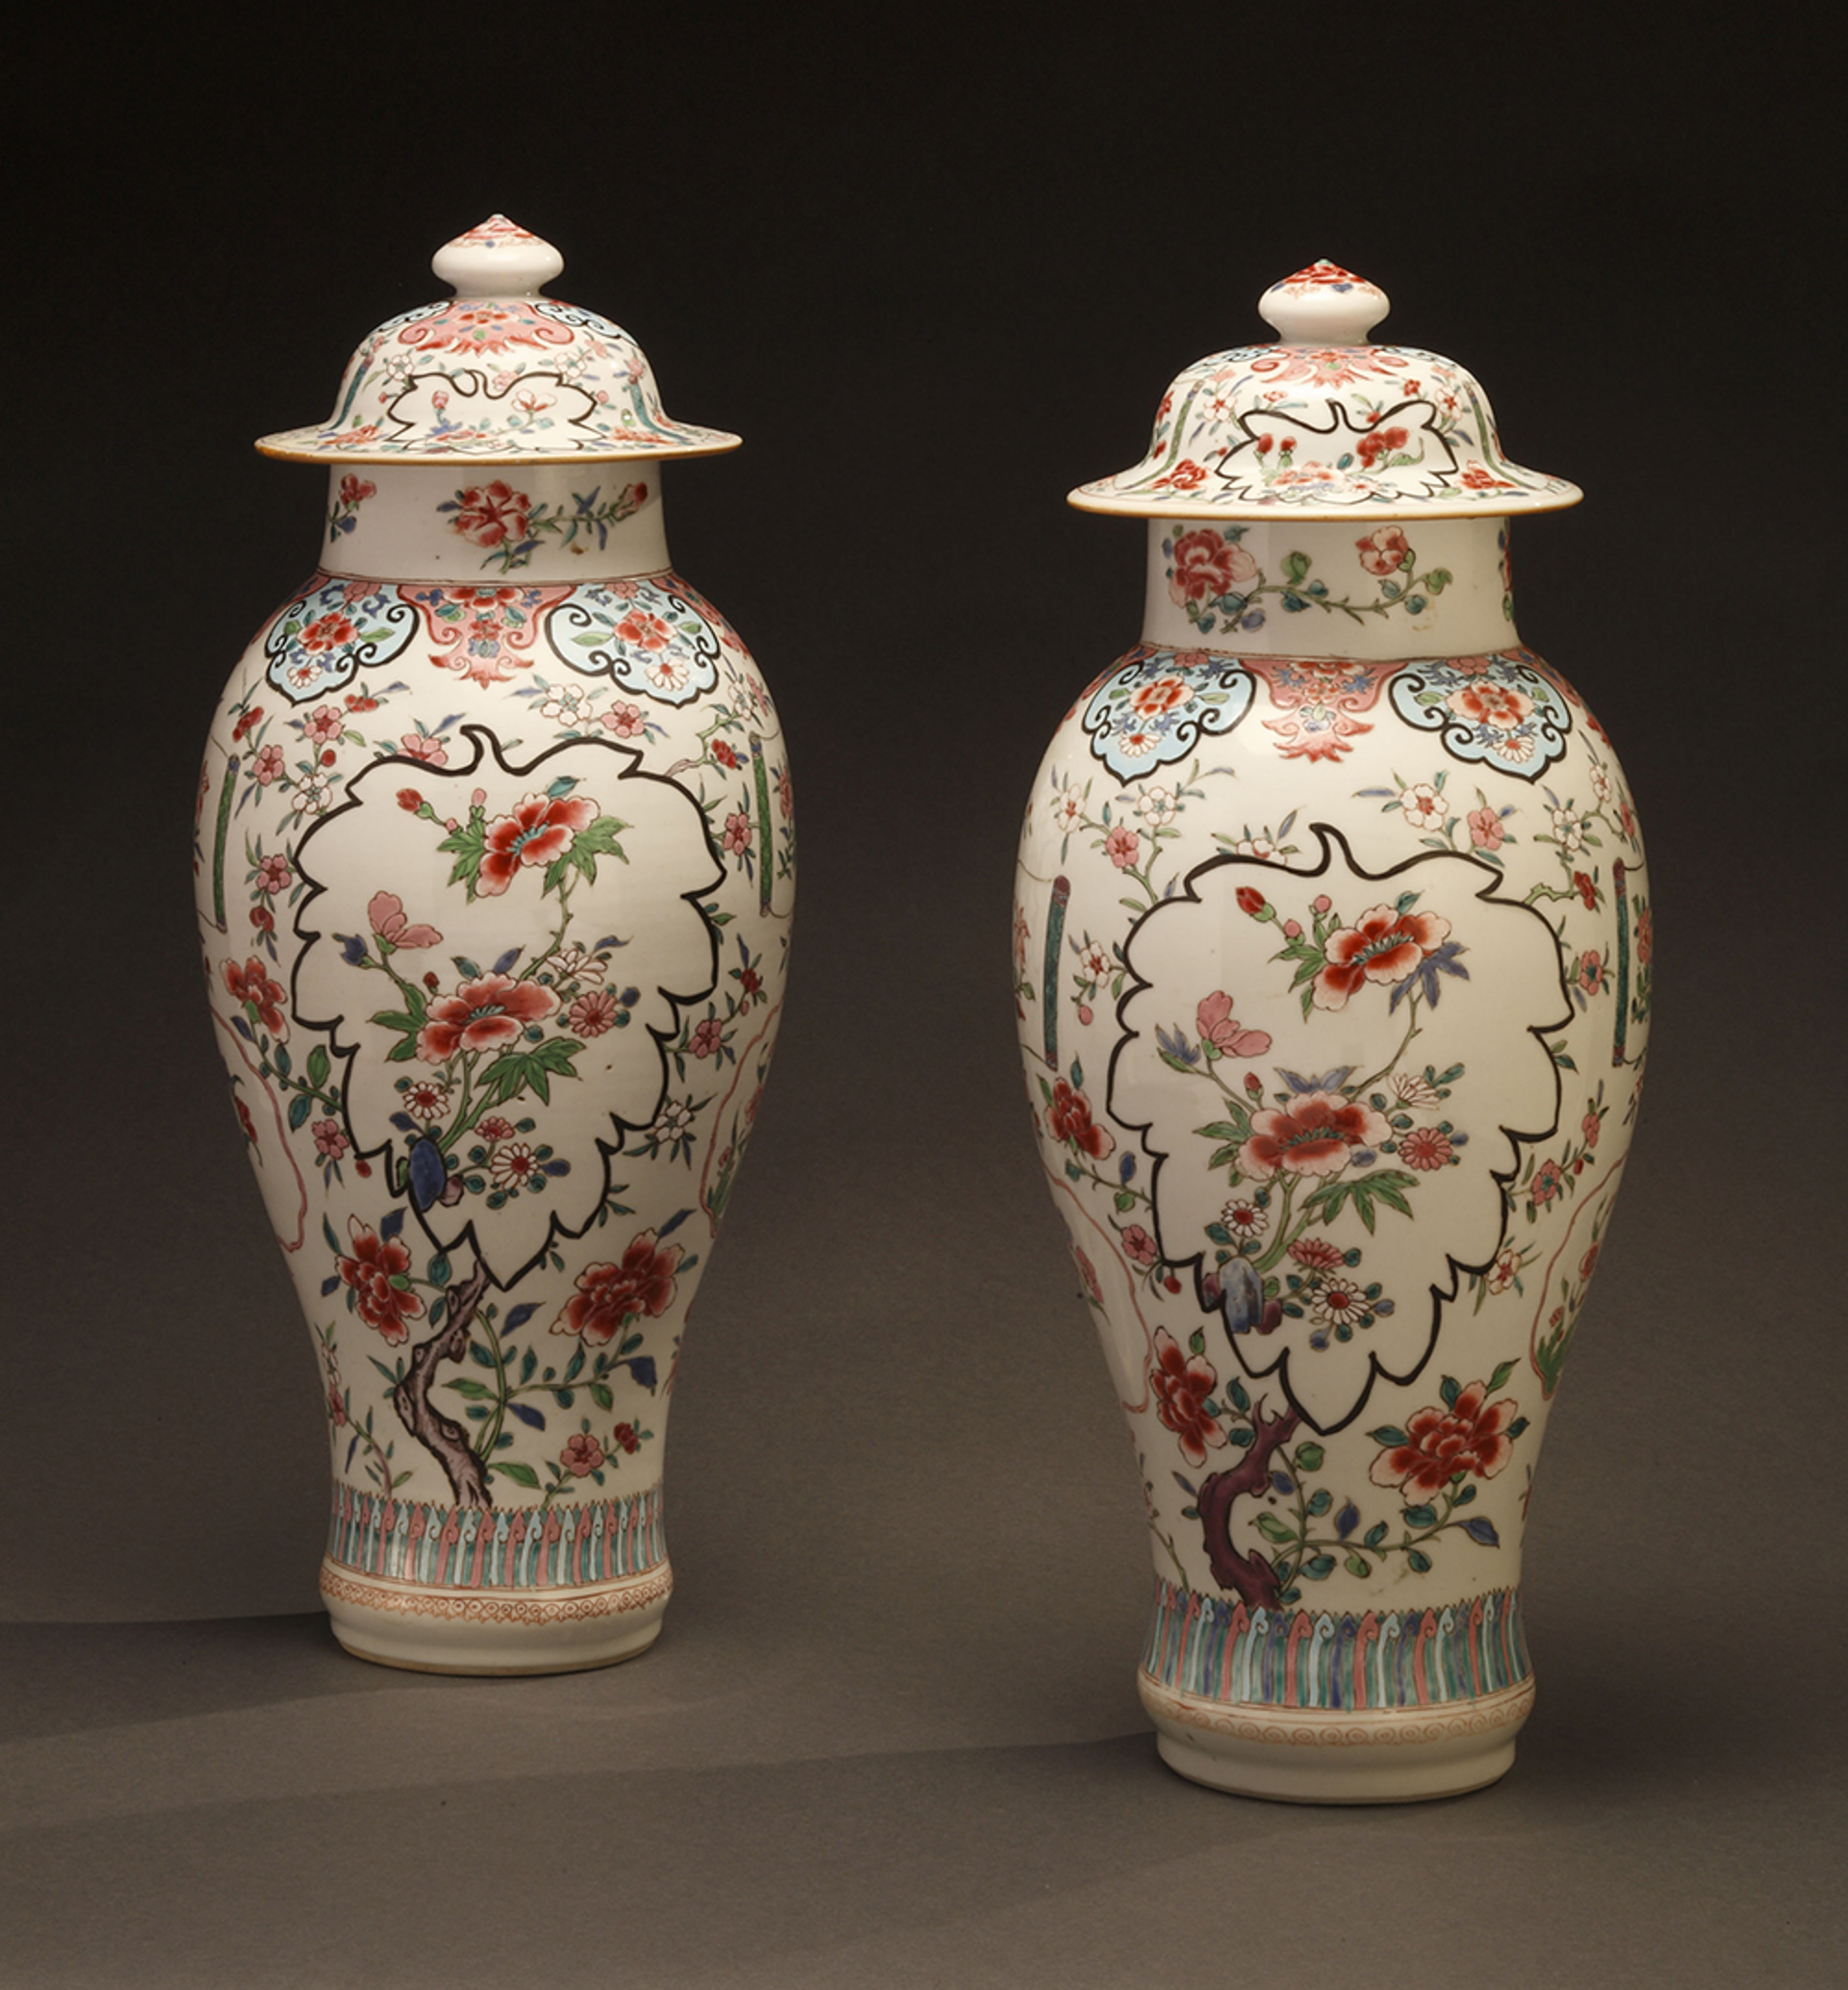 PAIR OF FAMILLE ROSE VASES AND COVERS